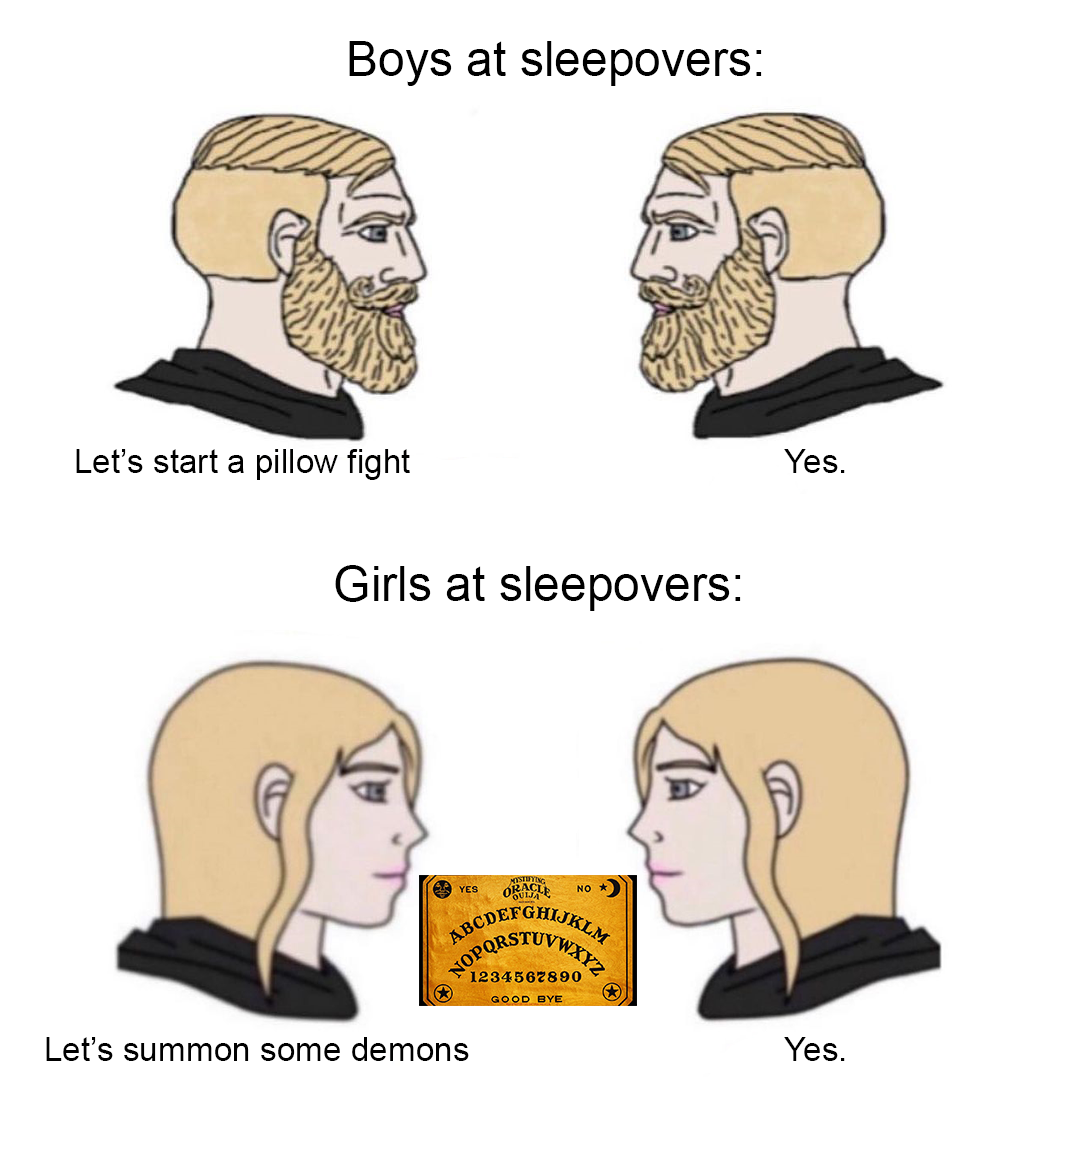 funny memes - dank memes - fight club meme - Boys at sleepovers Let's start a pillow fight Yes. Girls at sleepovers Ma . Jopor Oendo Od Rye Let's summon some demons Yes.